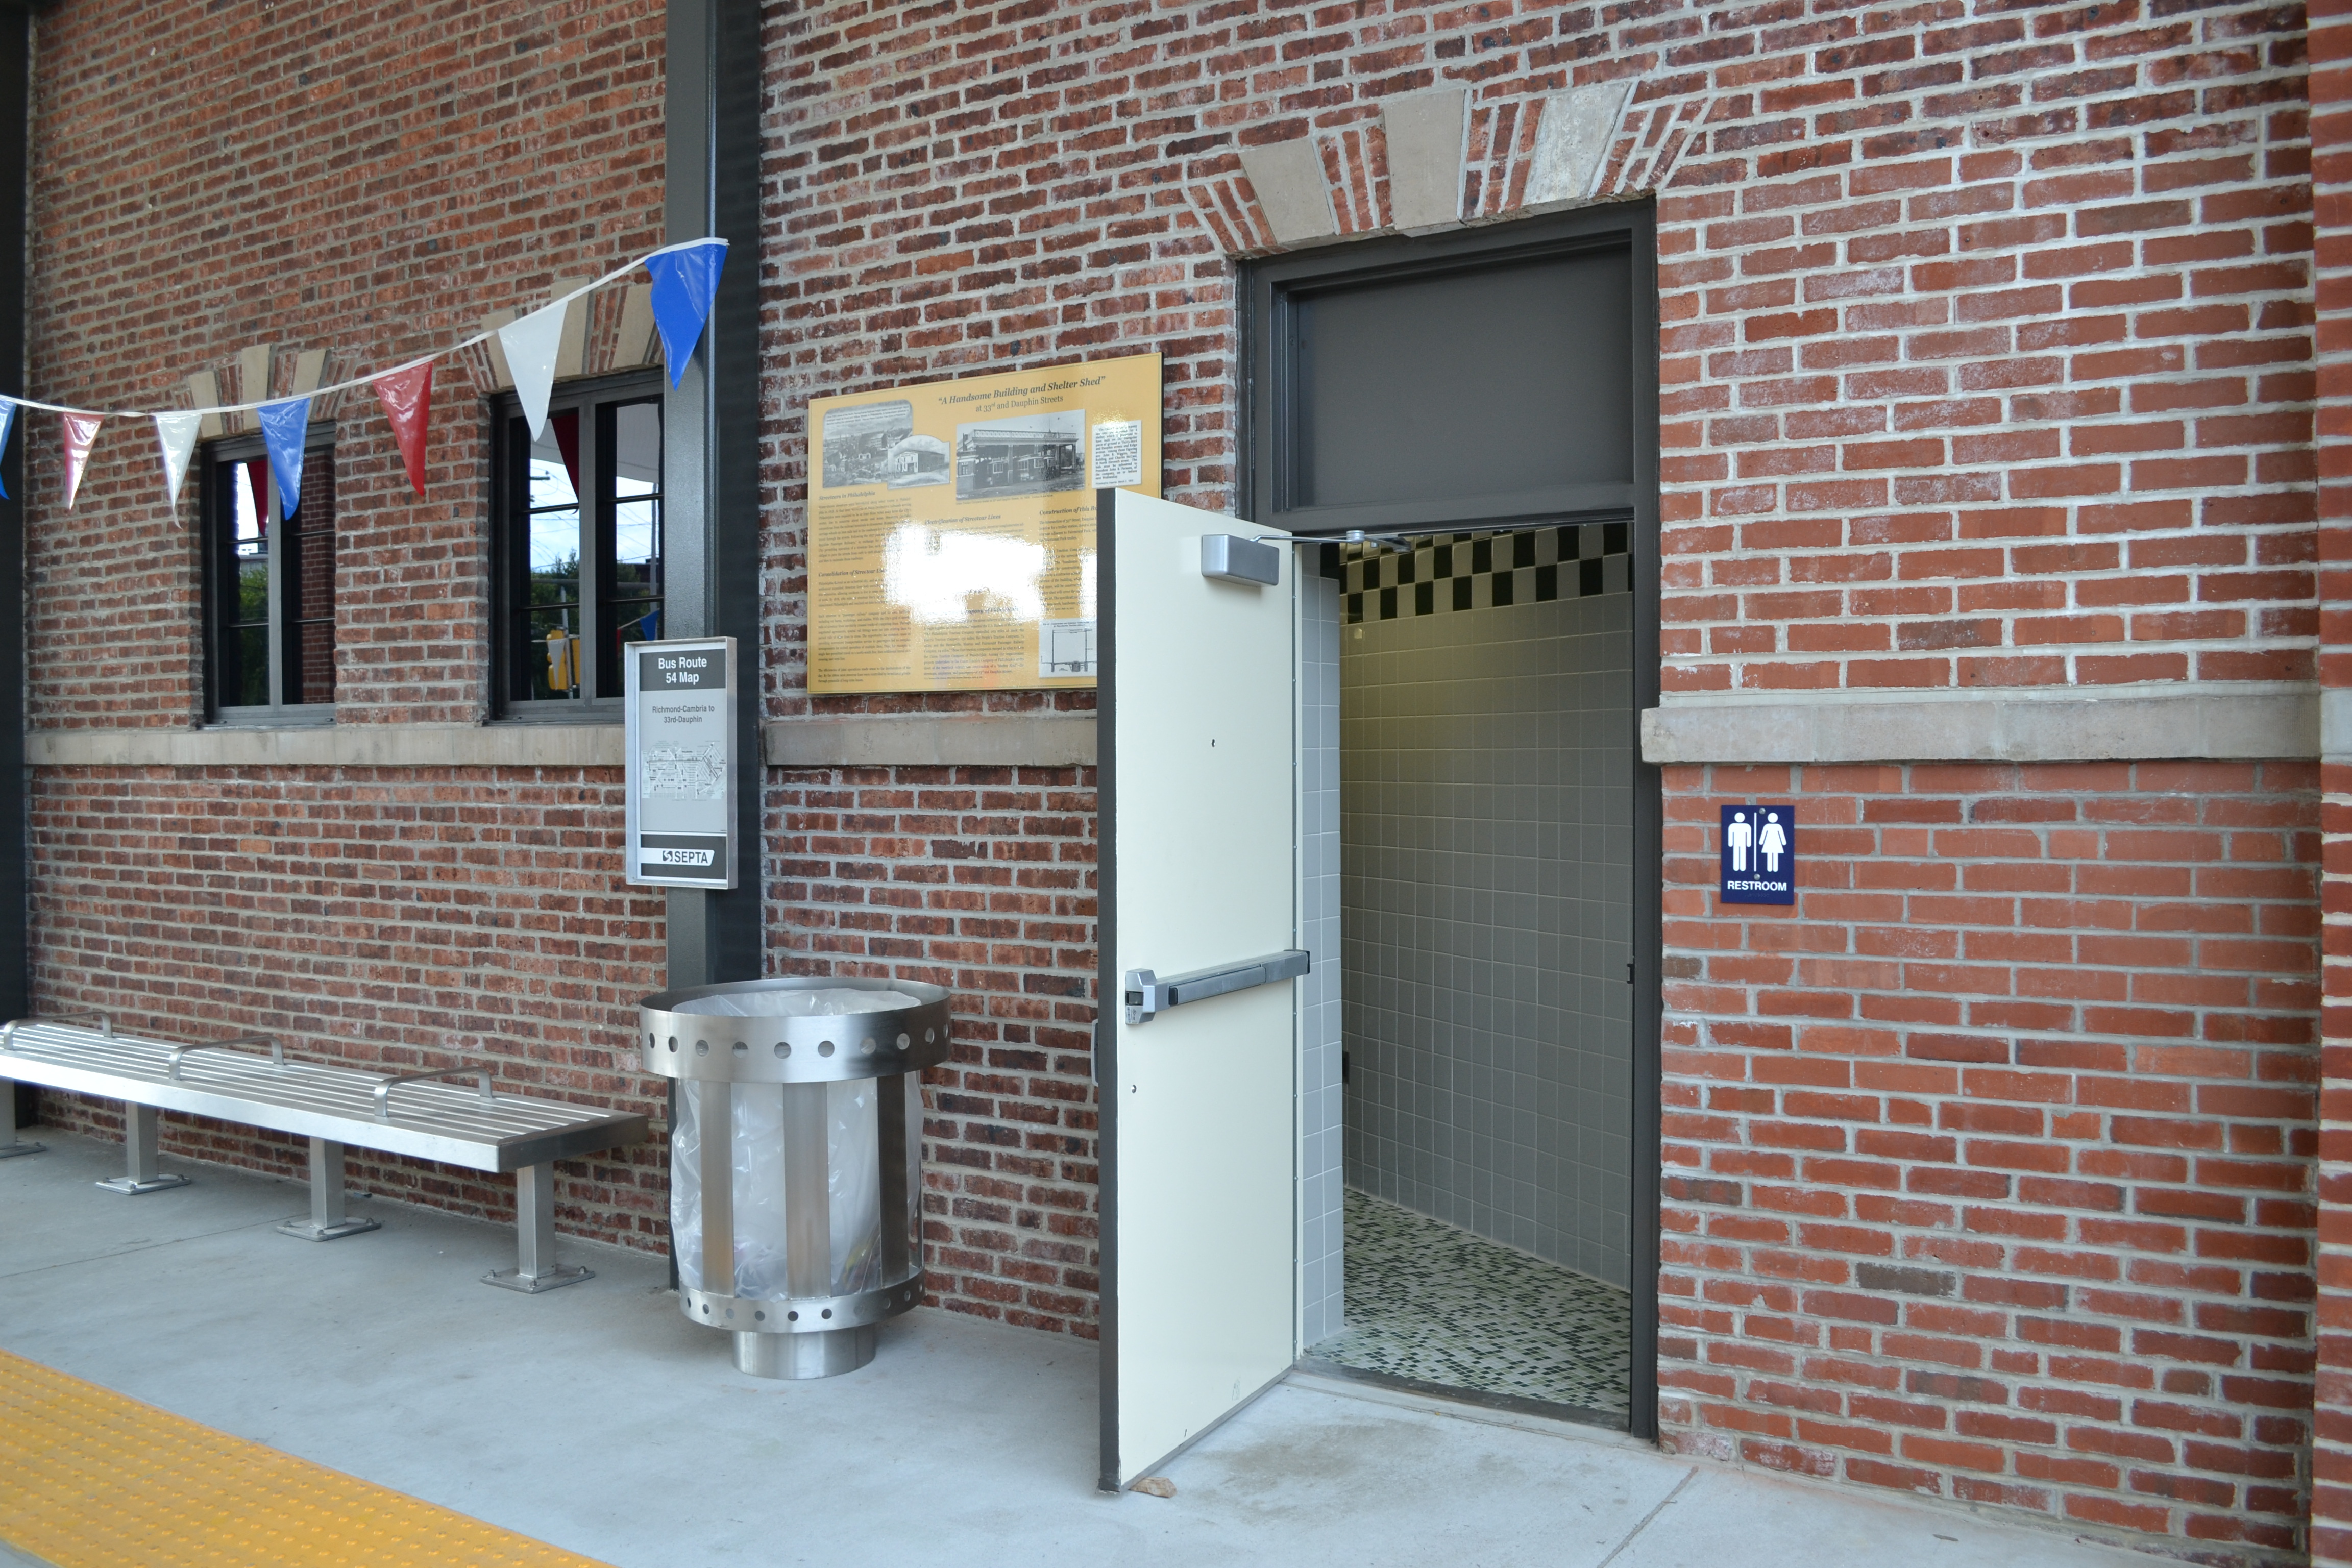 In addition to shelter, the bus loop provides bathrooms for passengers and SEPTA employees